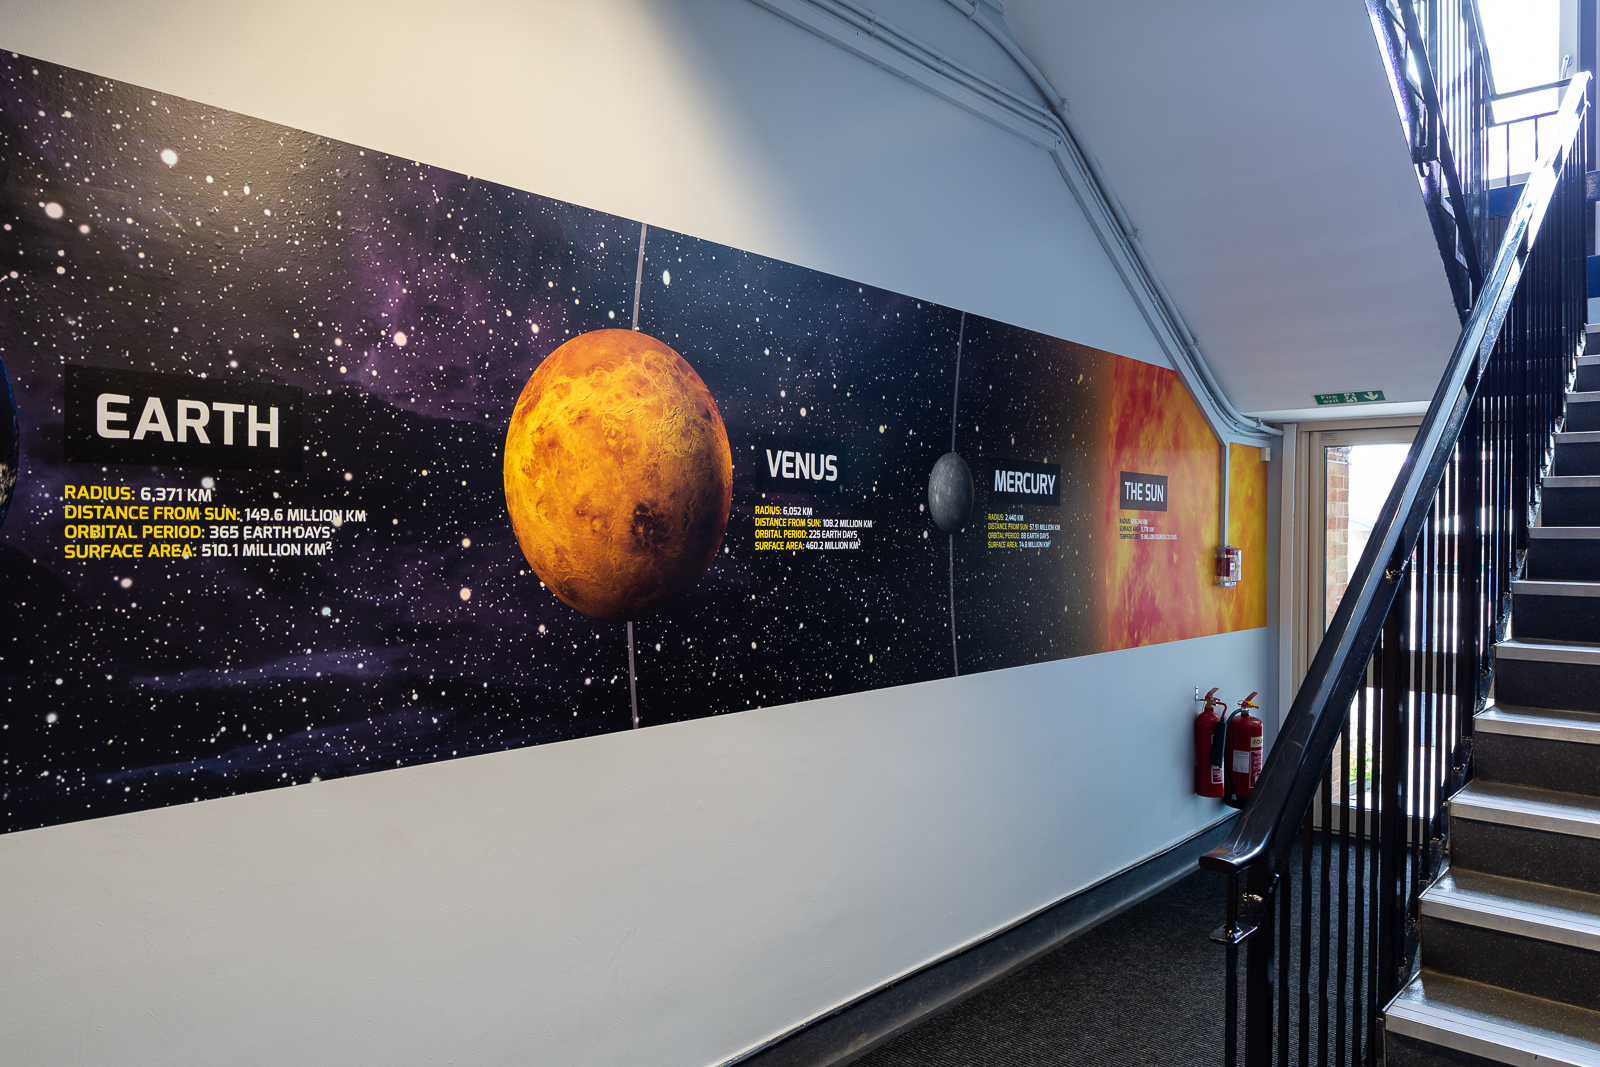 stairway wall art display solar system themed